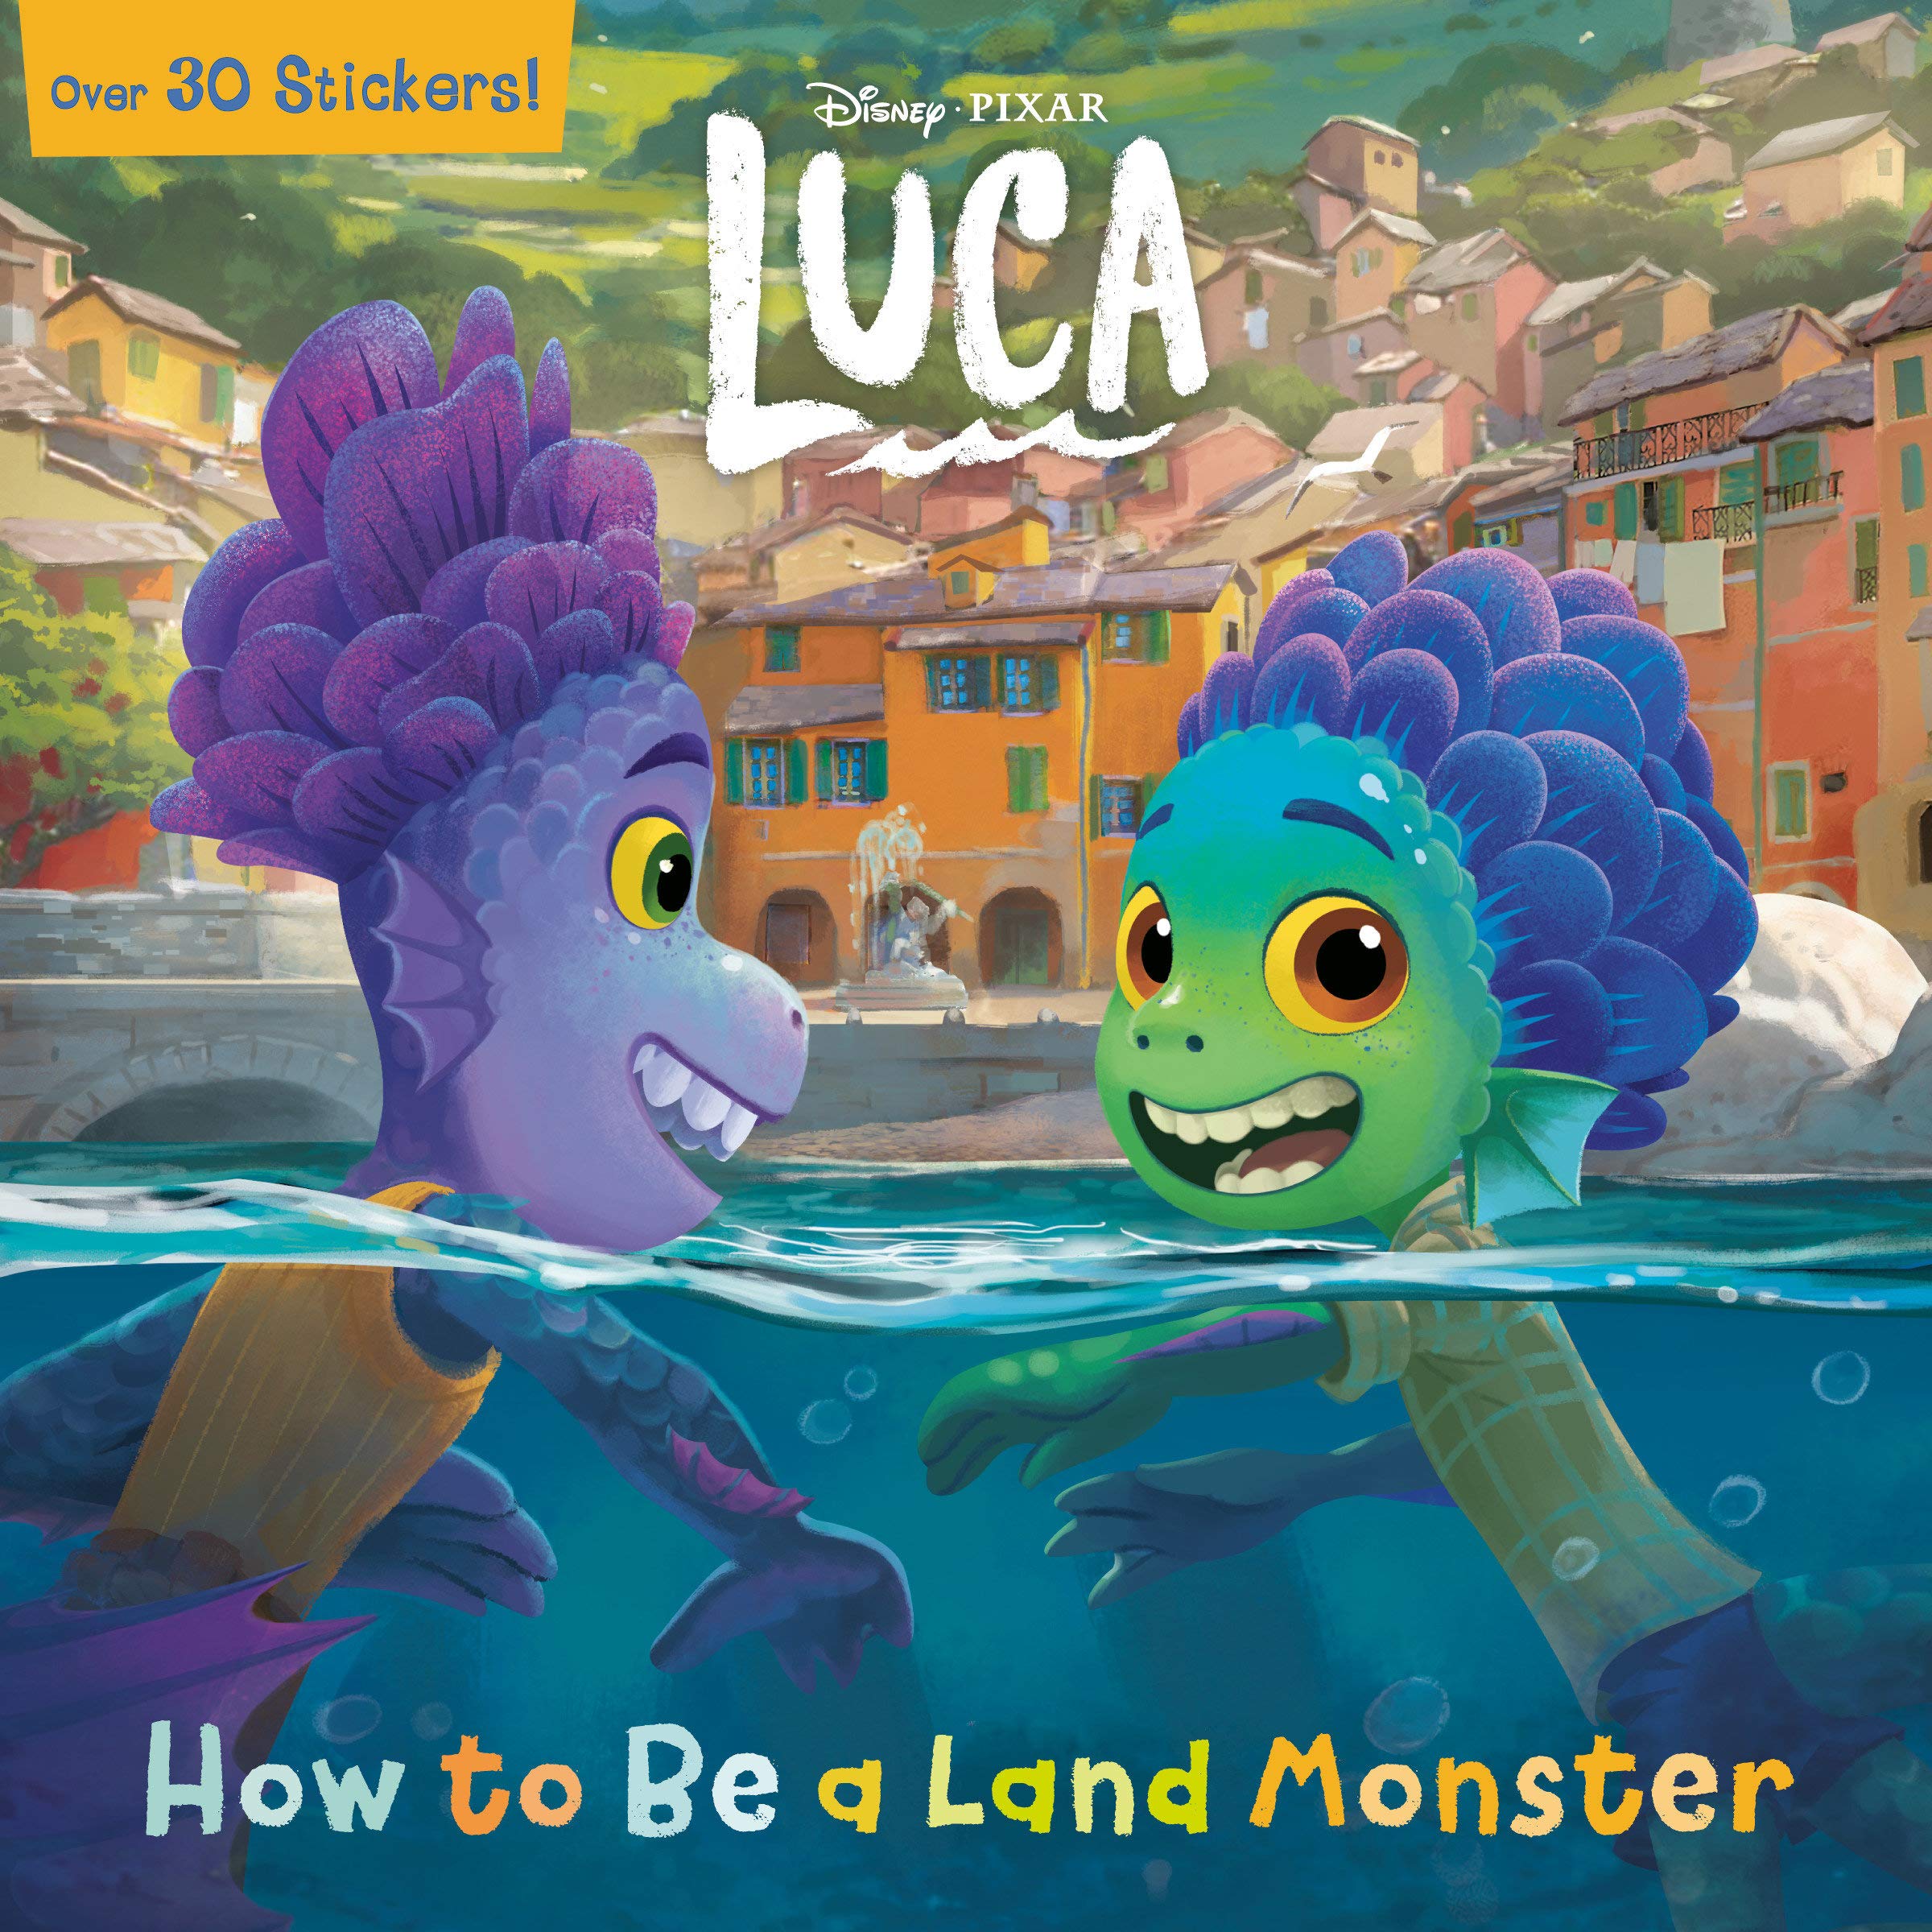 We Found The Perfect Way To Get Your Kids Excited For Disney Pixar's 'Luca'!